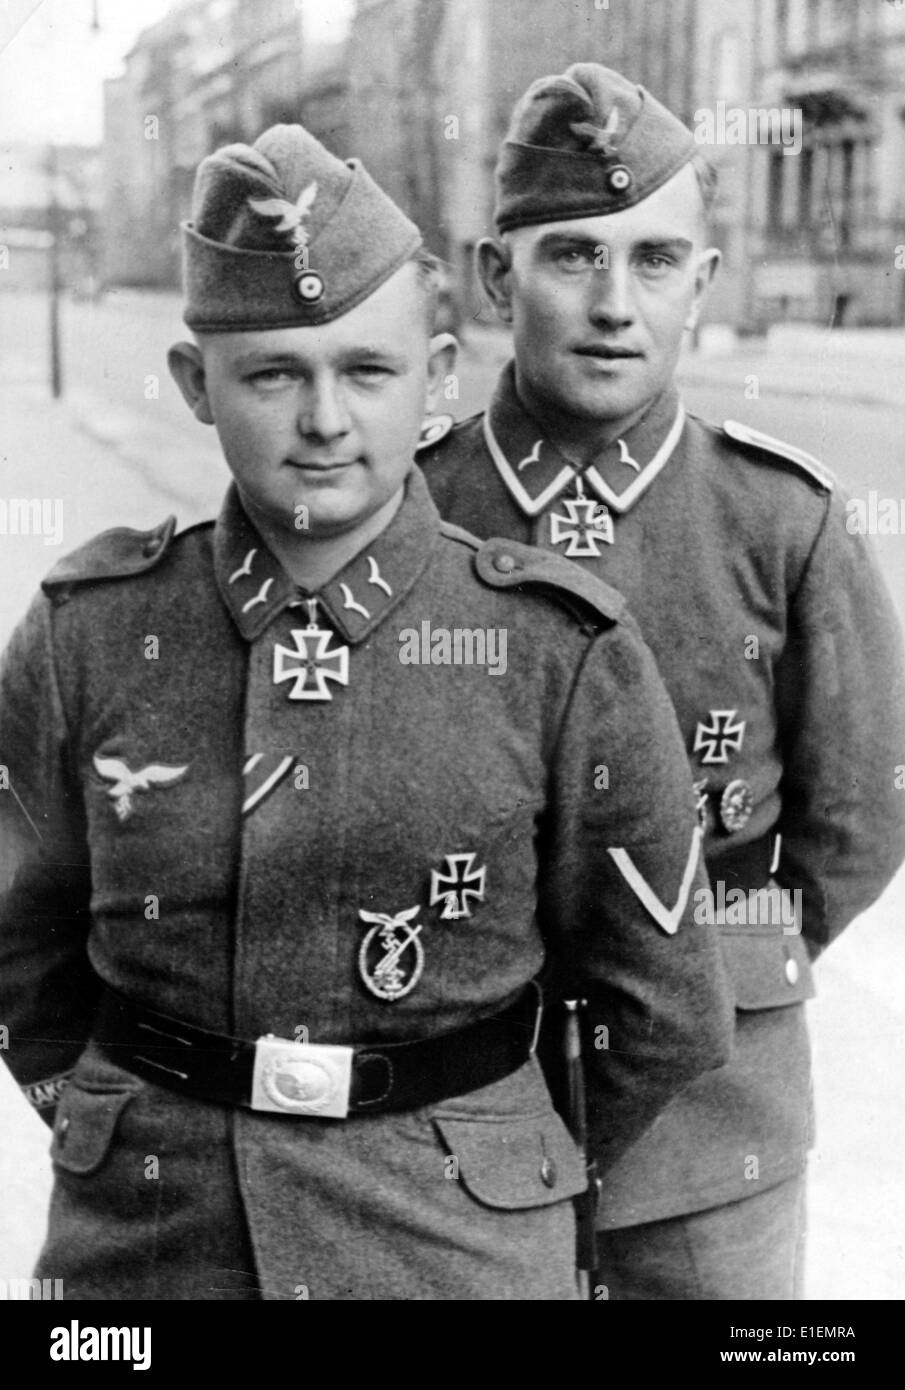 The picture from Nazi news reporting shows two anti-aircraft soldiers of the German Wehrmacht (armed forces) wearing their the Knight's Cross of the Iron Cross in April 1942. The Knight's Cross was awarded more than 7,000 times. Photo: Berliner Verlag/Archive -NO WIRE SERVICE- Stock Photo